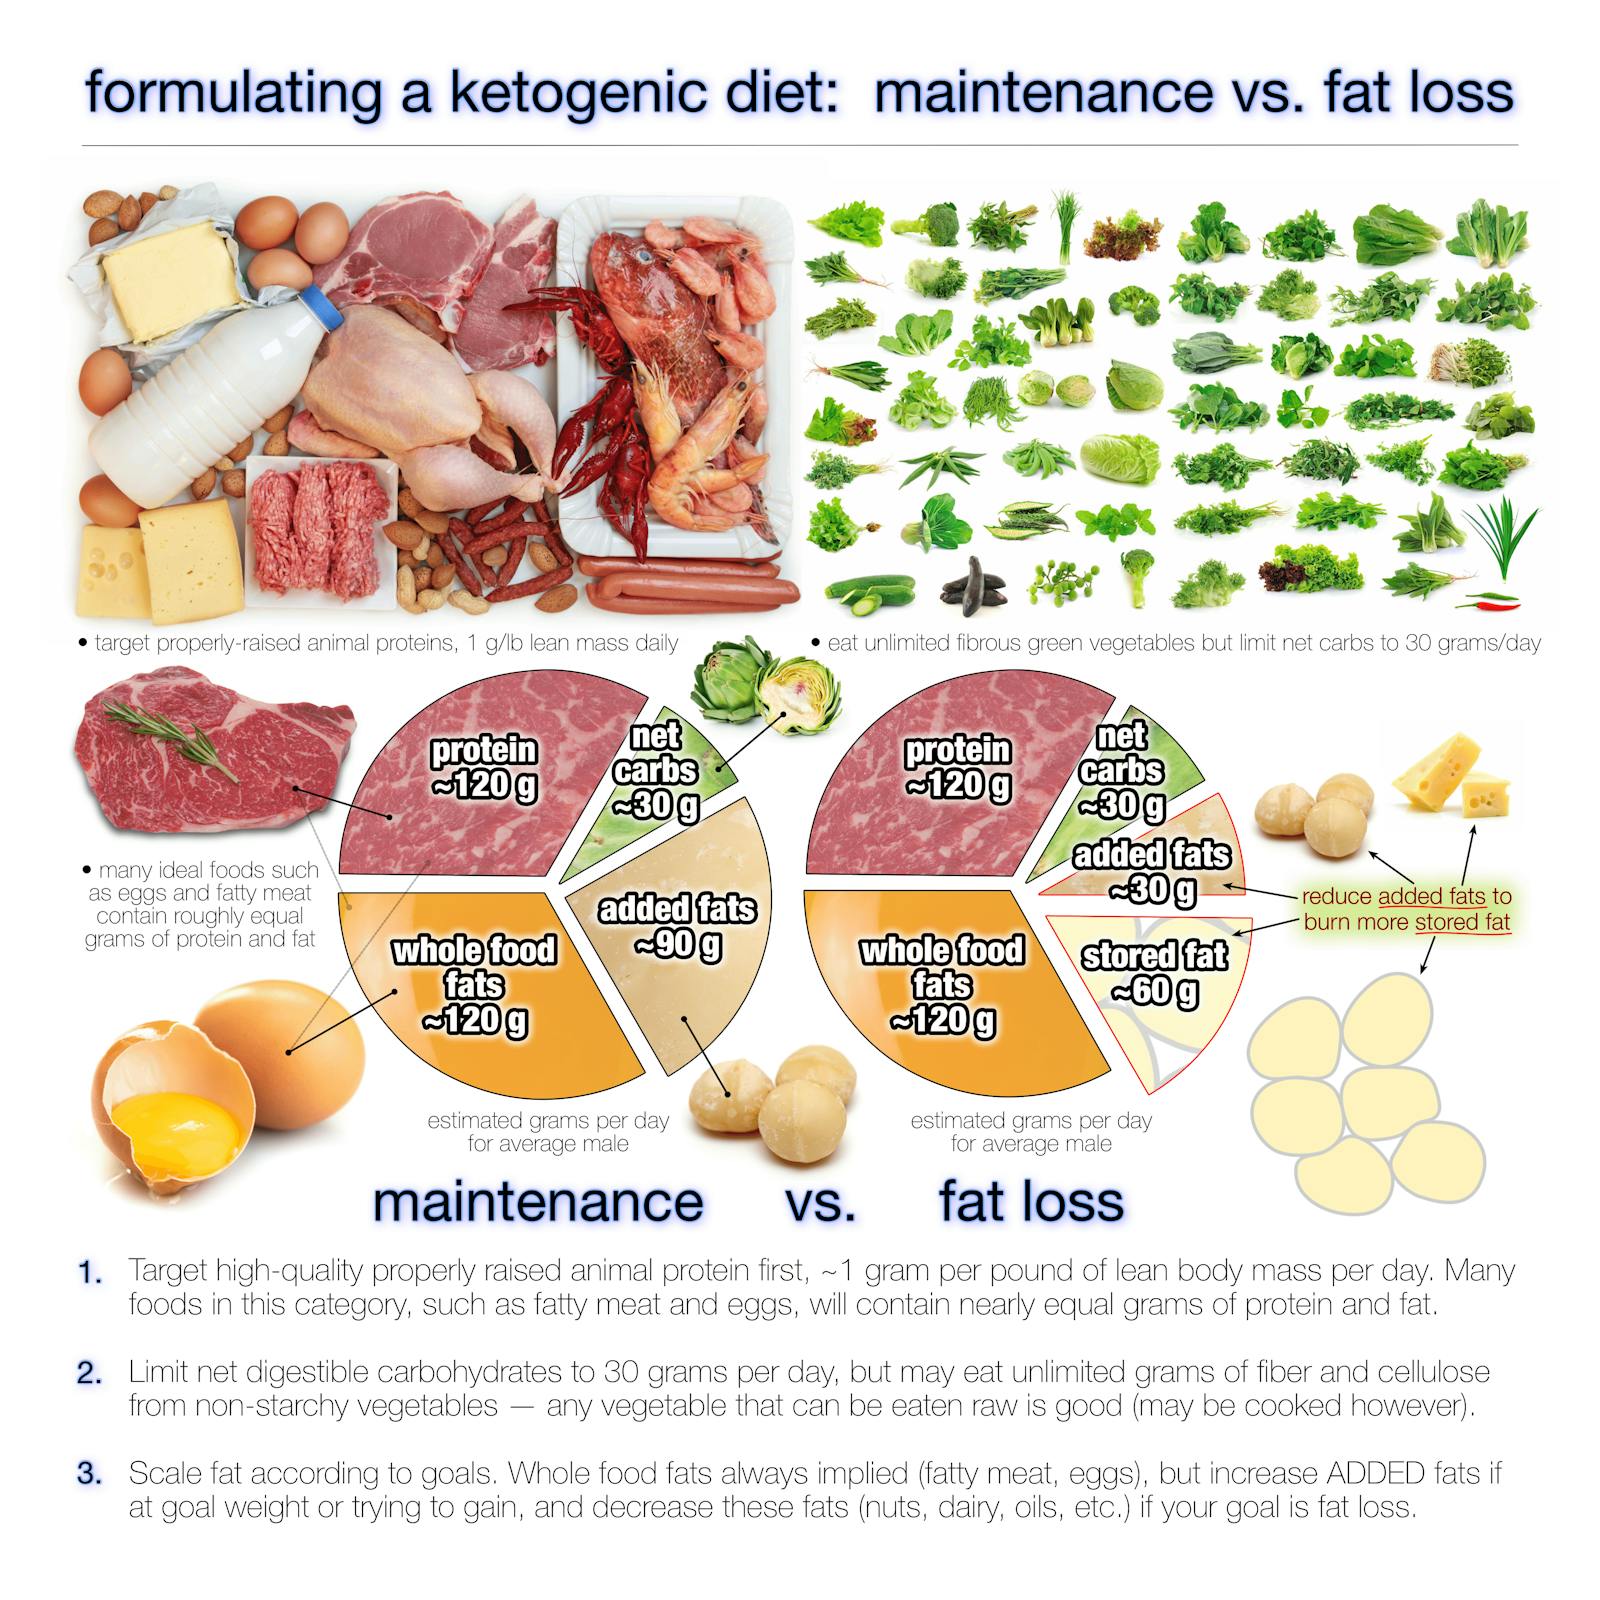 How much fat should you eat on a ketogenic diet? - Diet Doctor